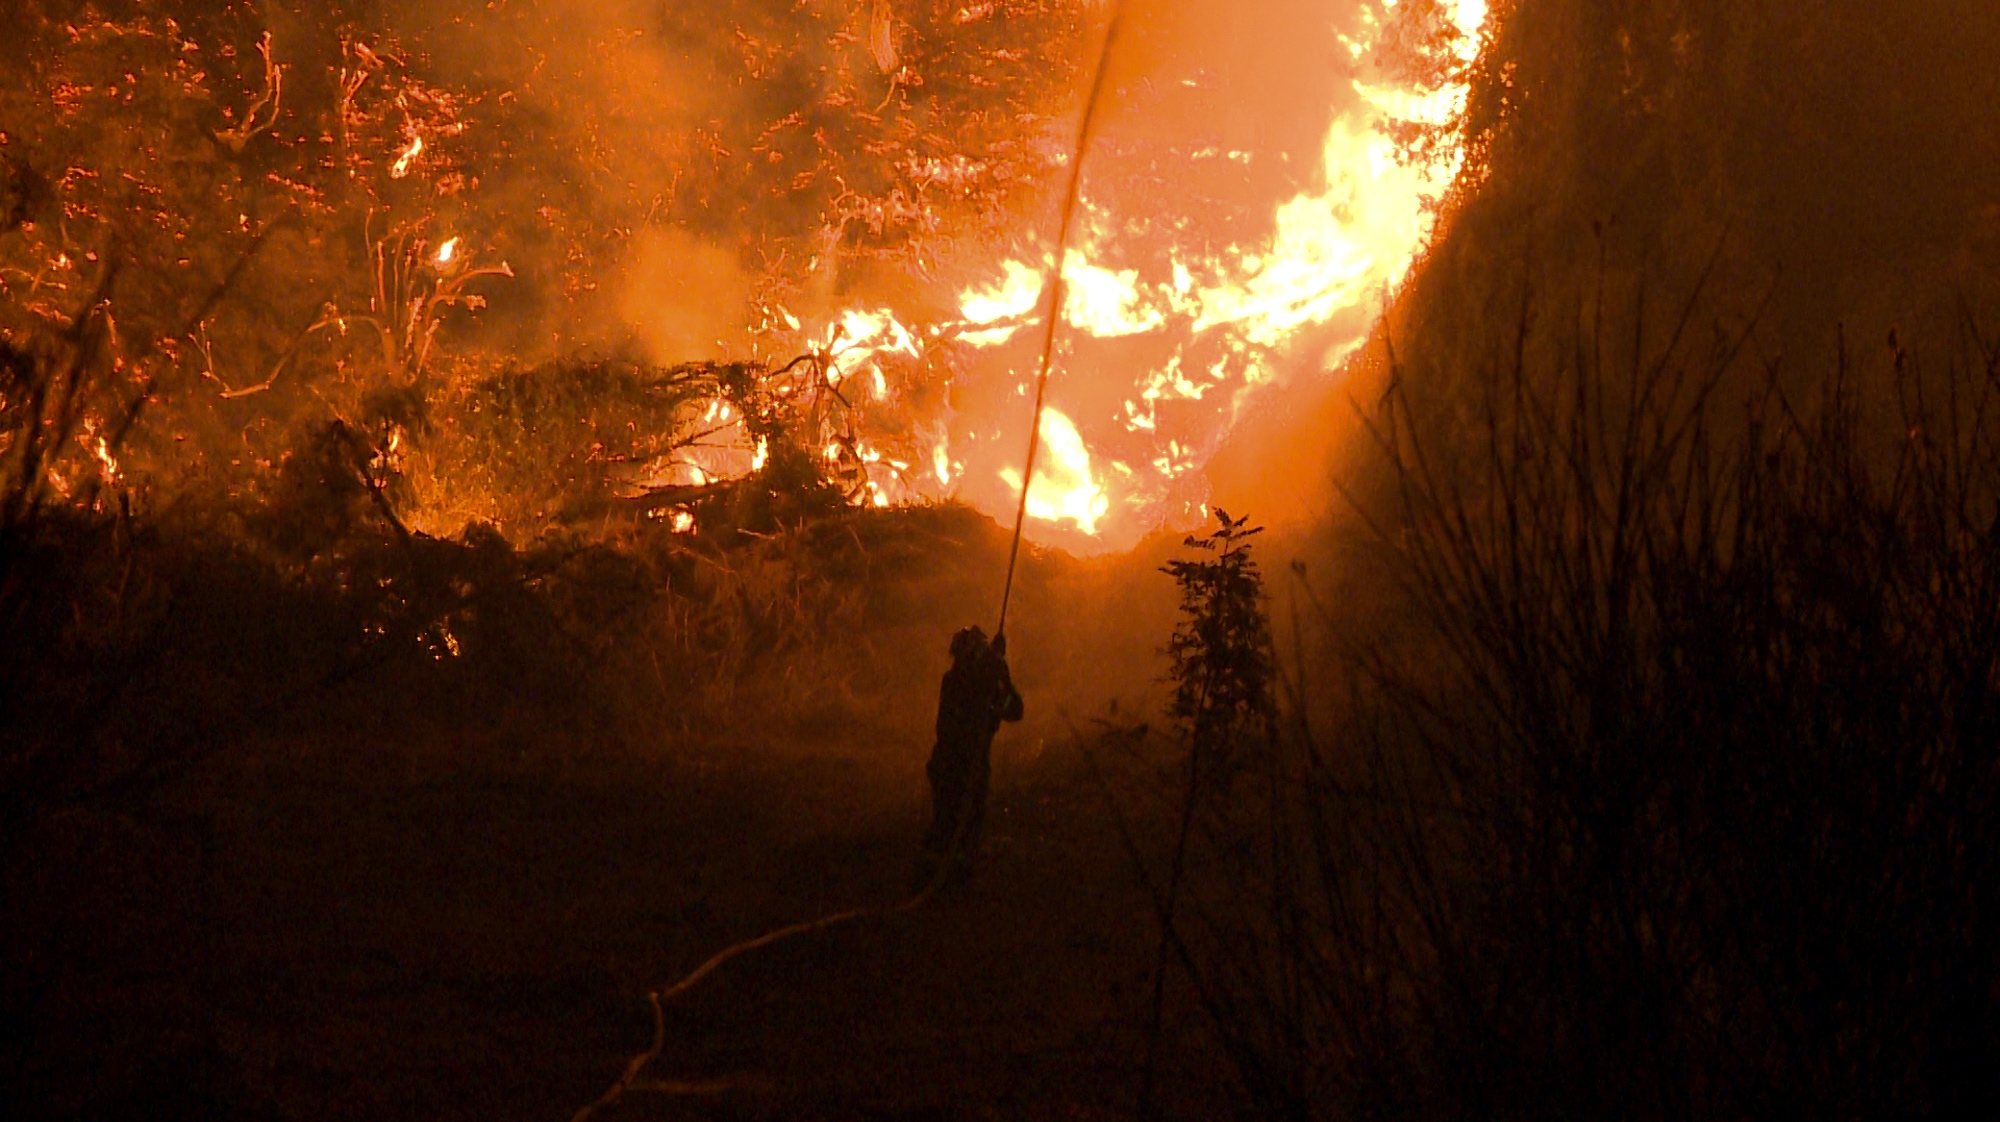 epa09409419 A firefighter sprays water during a wildfire in a forest area near the village of Kamatriades in Evia, on the night of 110 August 2021 (issued on 11 August 2021). Fires that broke out in Attica and Evia island this week have burned more than a quarter of a million stremmas, the National Observatory of Athens&#039; center Beyond said on 08 August. Some 76,150 stremmas (7,615 hectares) have been burnt so far in northern Attica. In Evia island the surface area of burnt land is measured at 197,940 stremmas (19,794 hectares). These figures concern only the fires in Attica and Evia, but dozens of large fires have affected several areas across the country.  EPA/SPIROS KOUROS